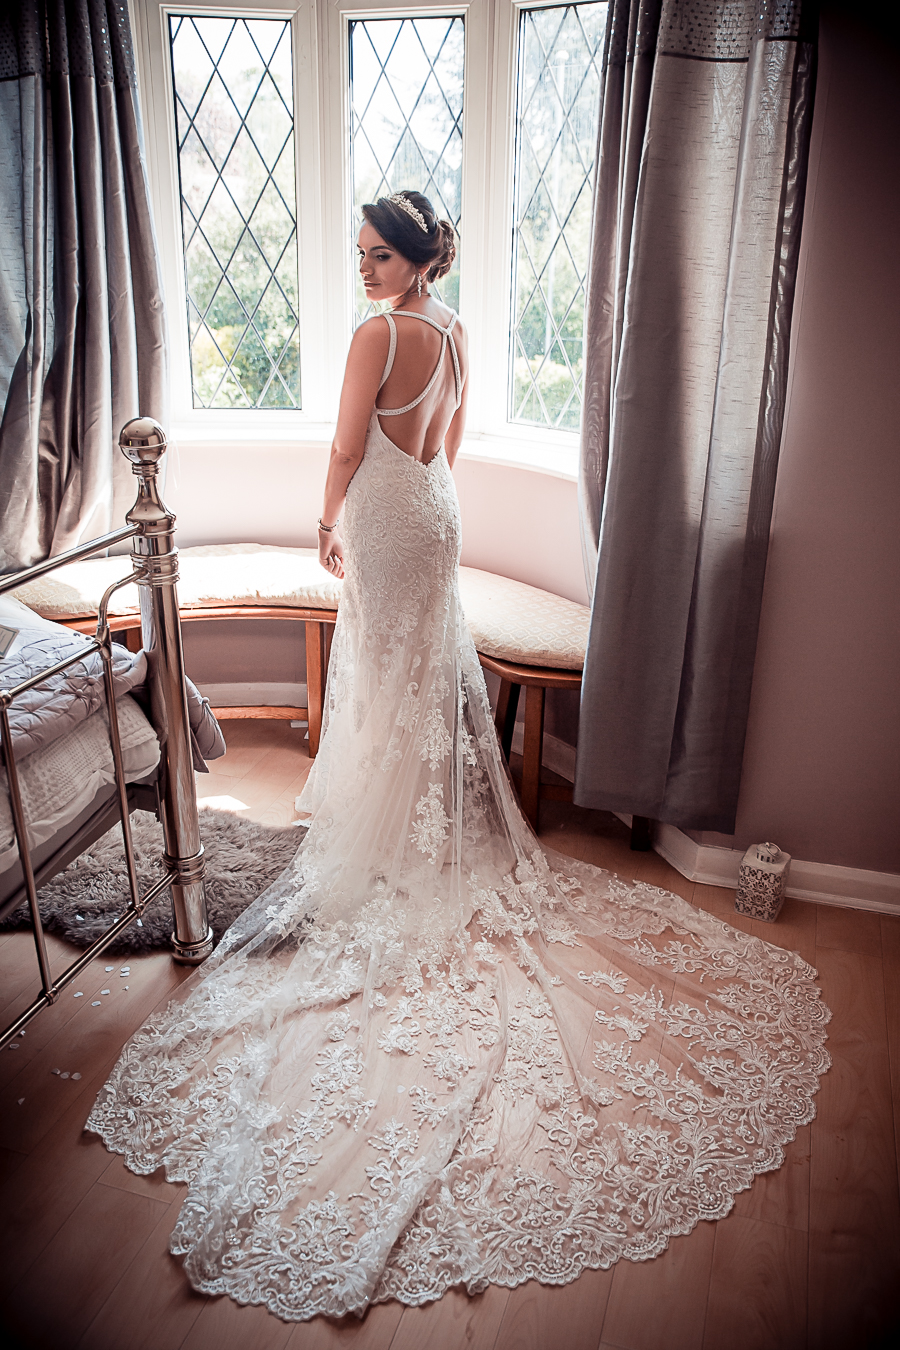 Real wedding at Chateau Impney classic glamorous style, Nicholas Rogers Photography (6)